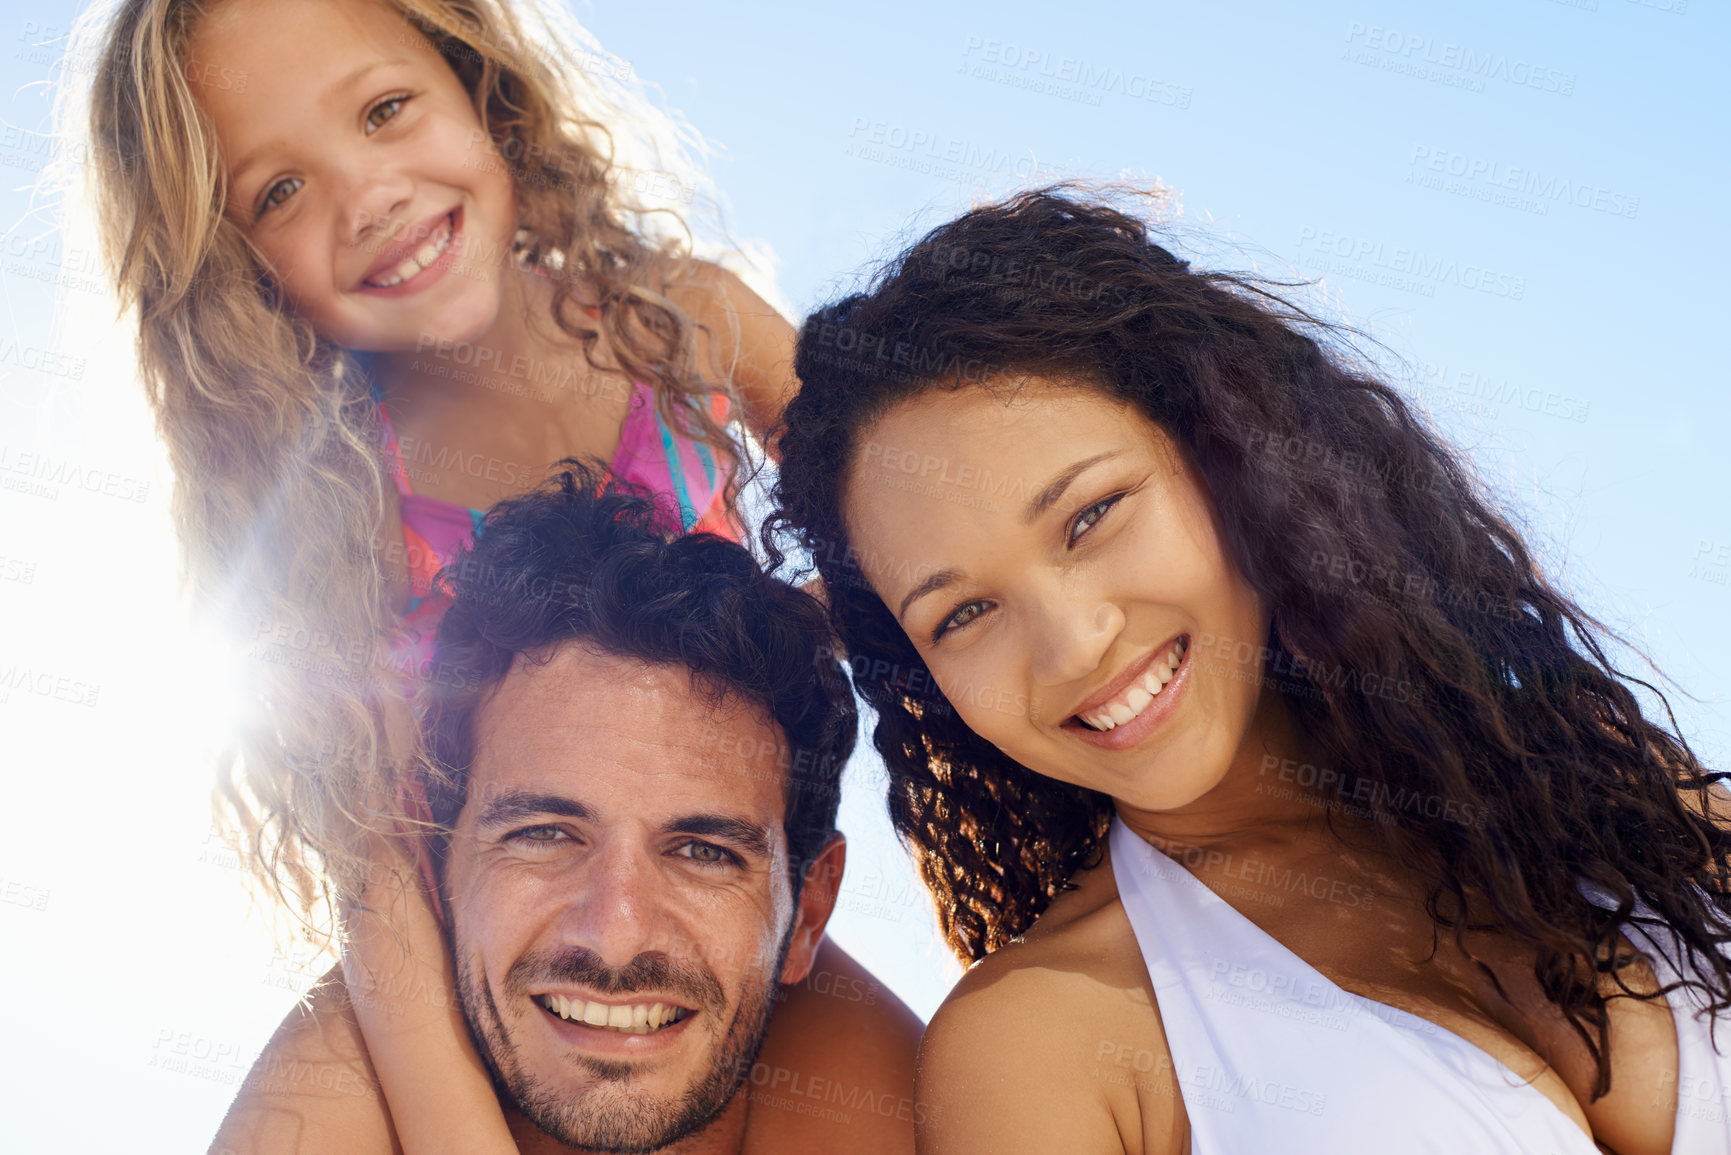 Buy stock photo Happy family, portrait and beach sun on bonding, vacation or outdoor holiday weekend together. Face of father, mother and child smile in hug for love, support or summer break by ocean coast in nature